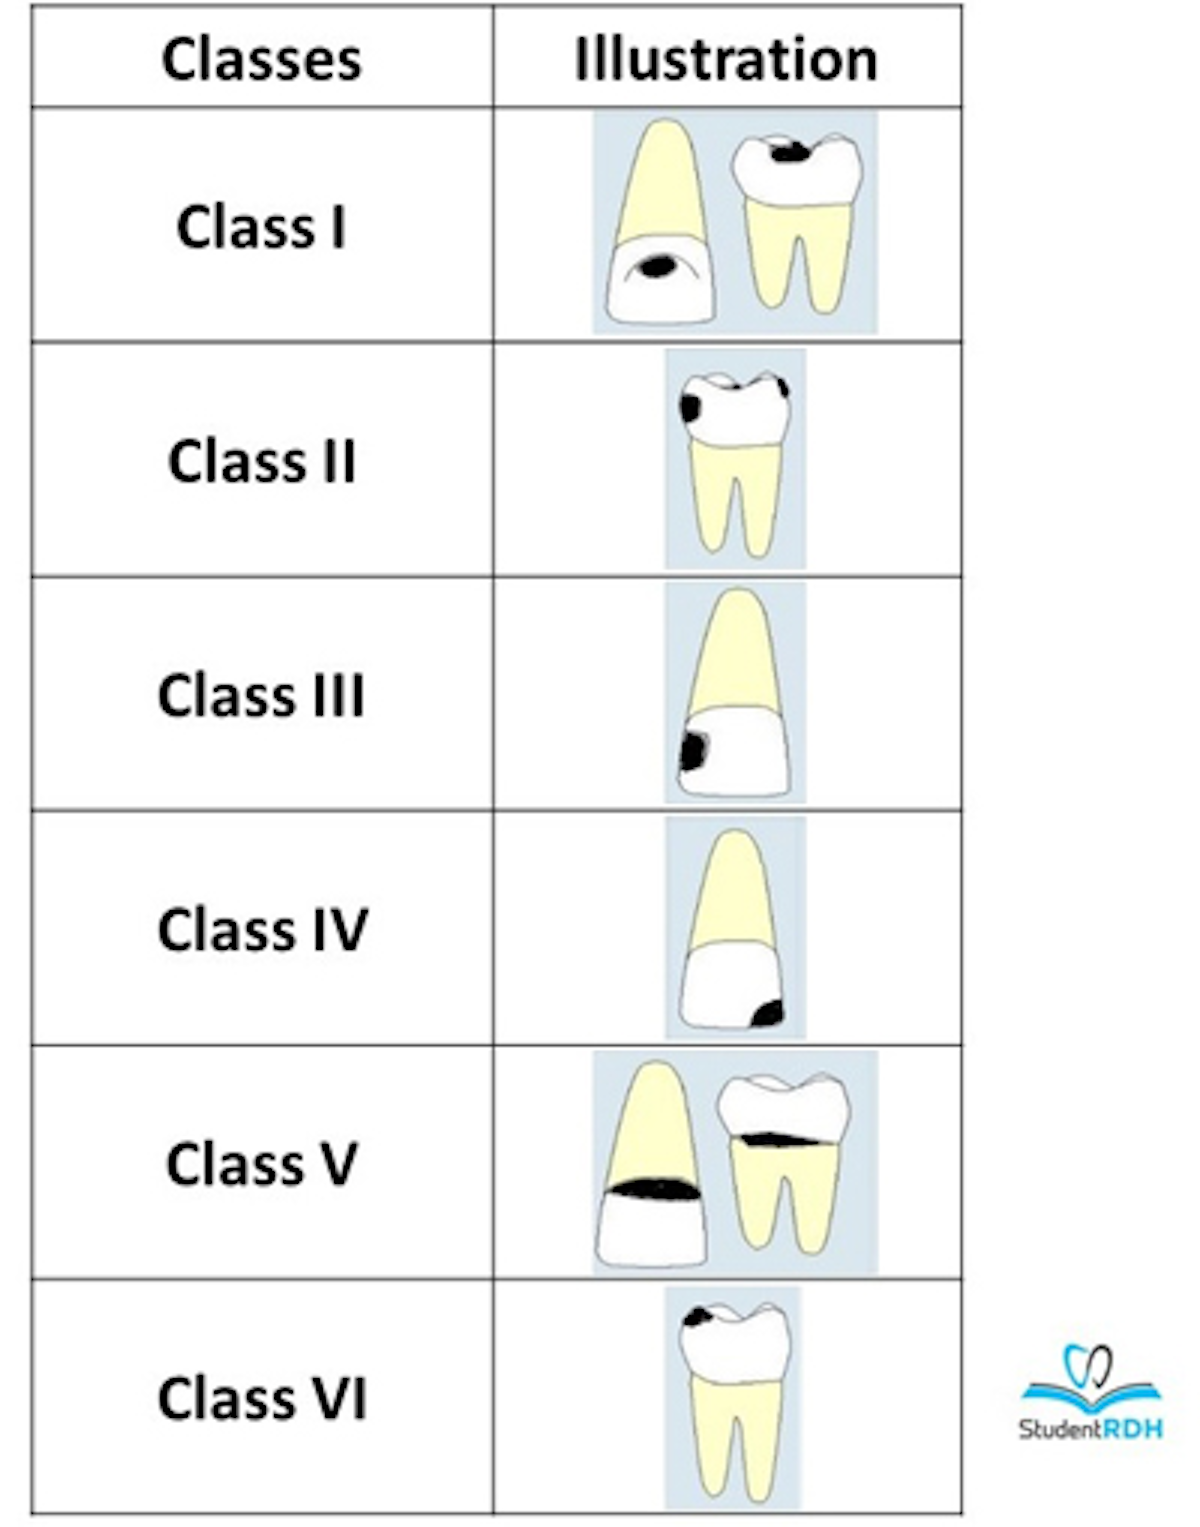 Must Know Classifications Of Dental Caries For The National Dental Hygiene Boards Dentistryiq